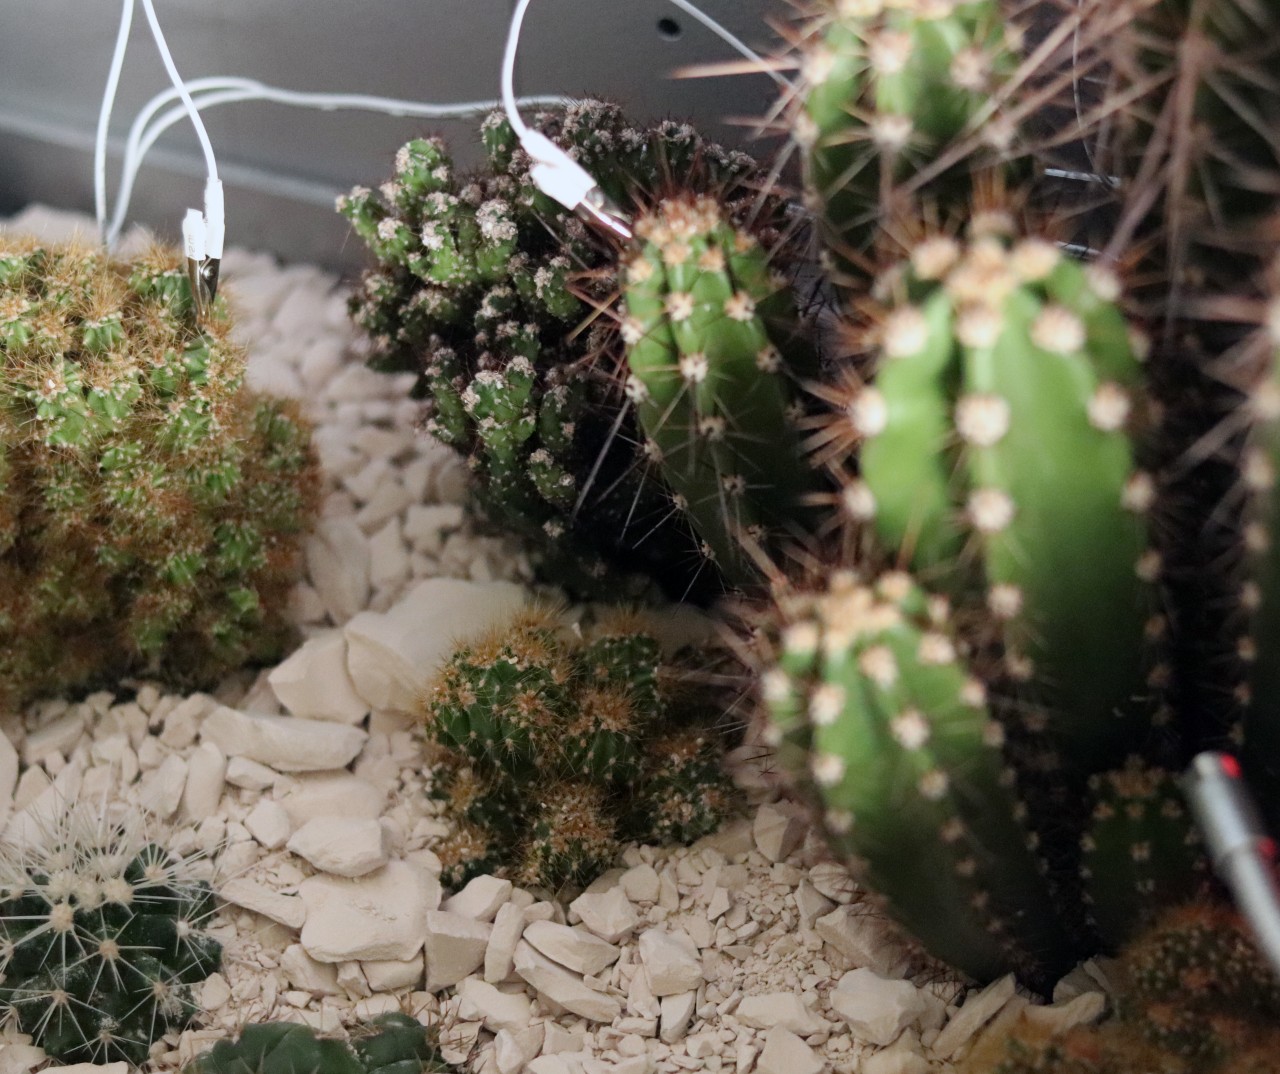 This strange-looking plant box uses science to create eerie music